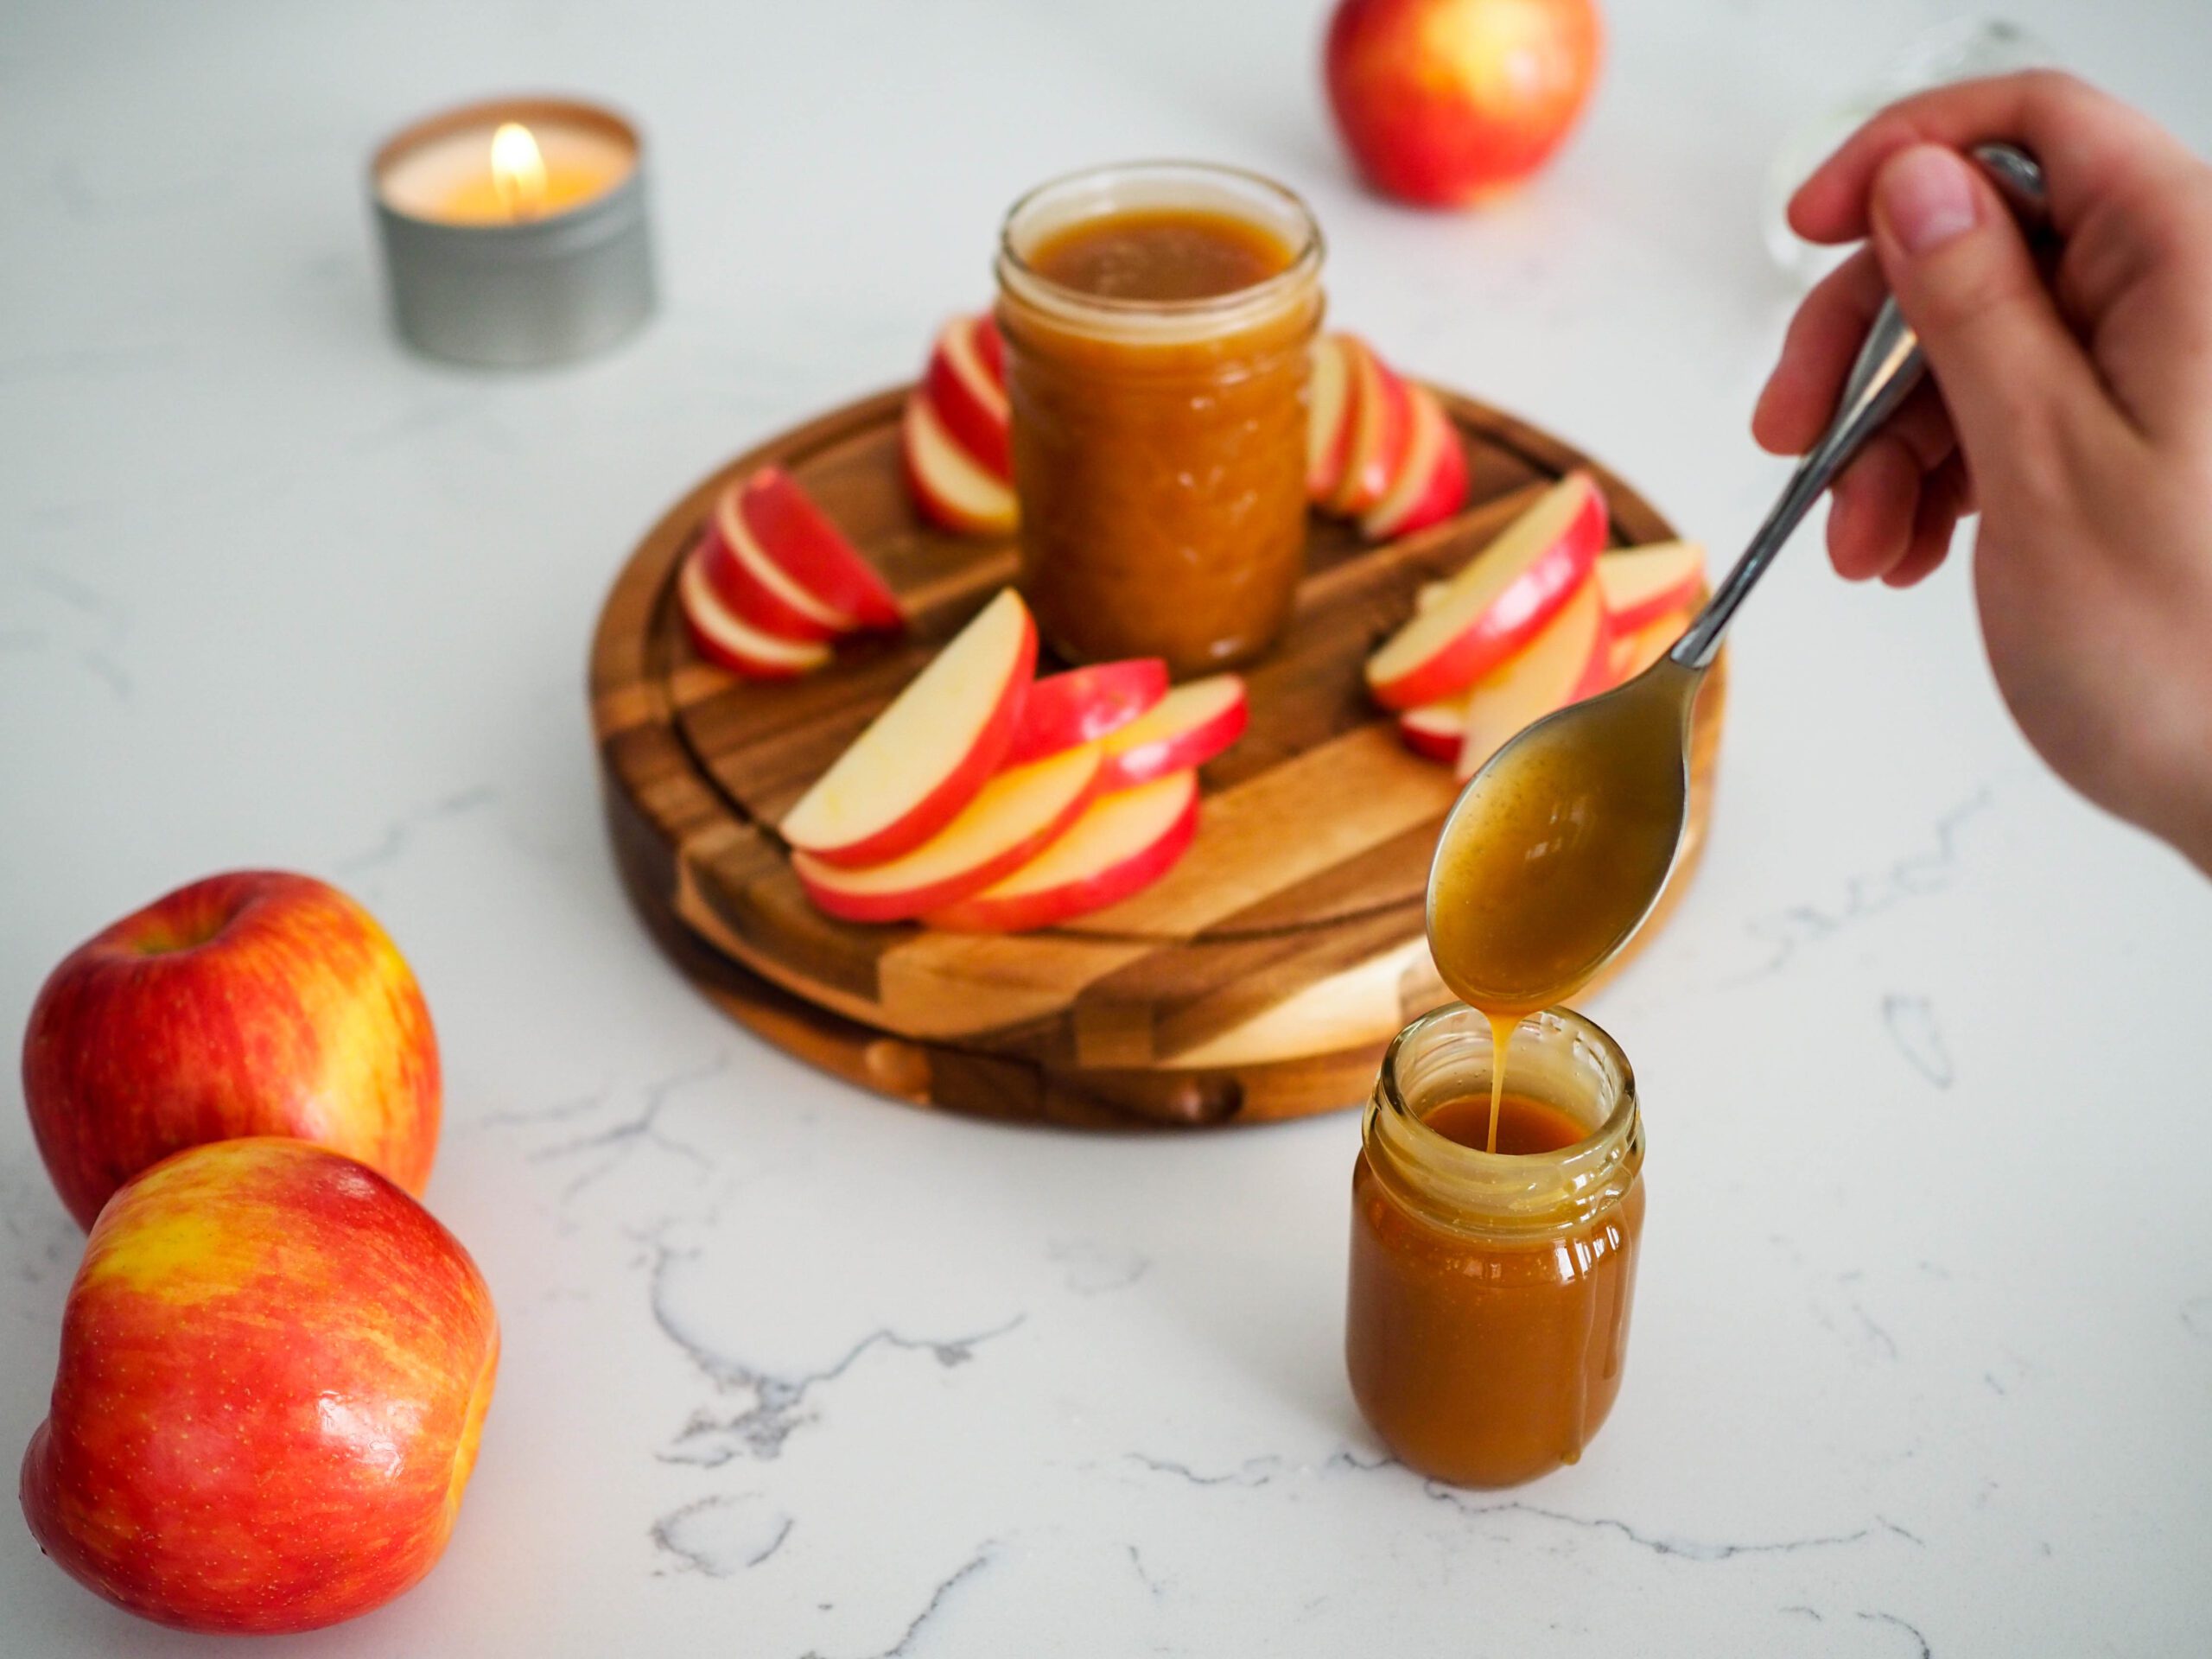 A hand dips a silver spoon into a jar of caramel, with sliced apples and another caramel jar behind it.